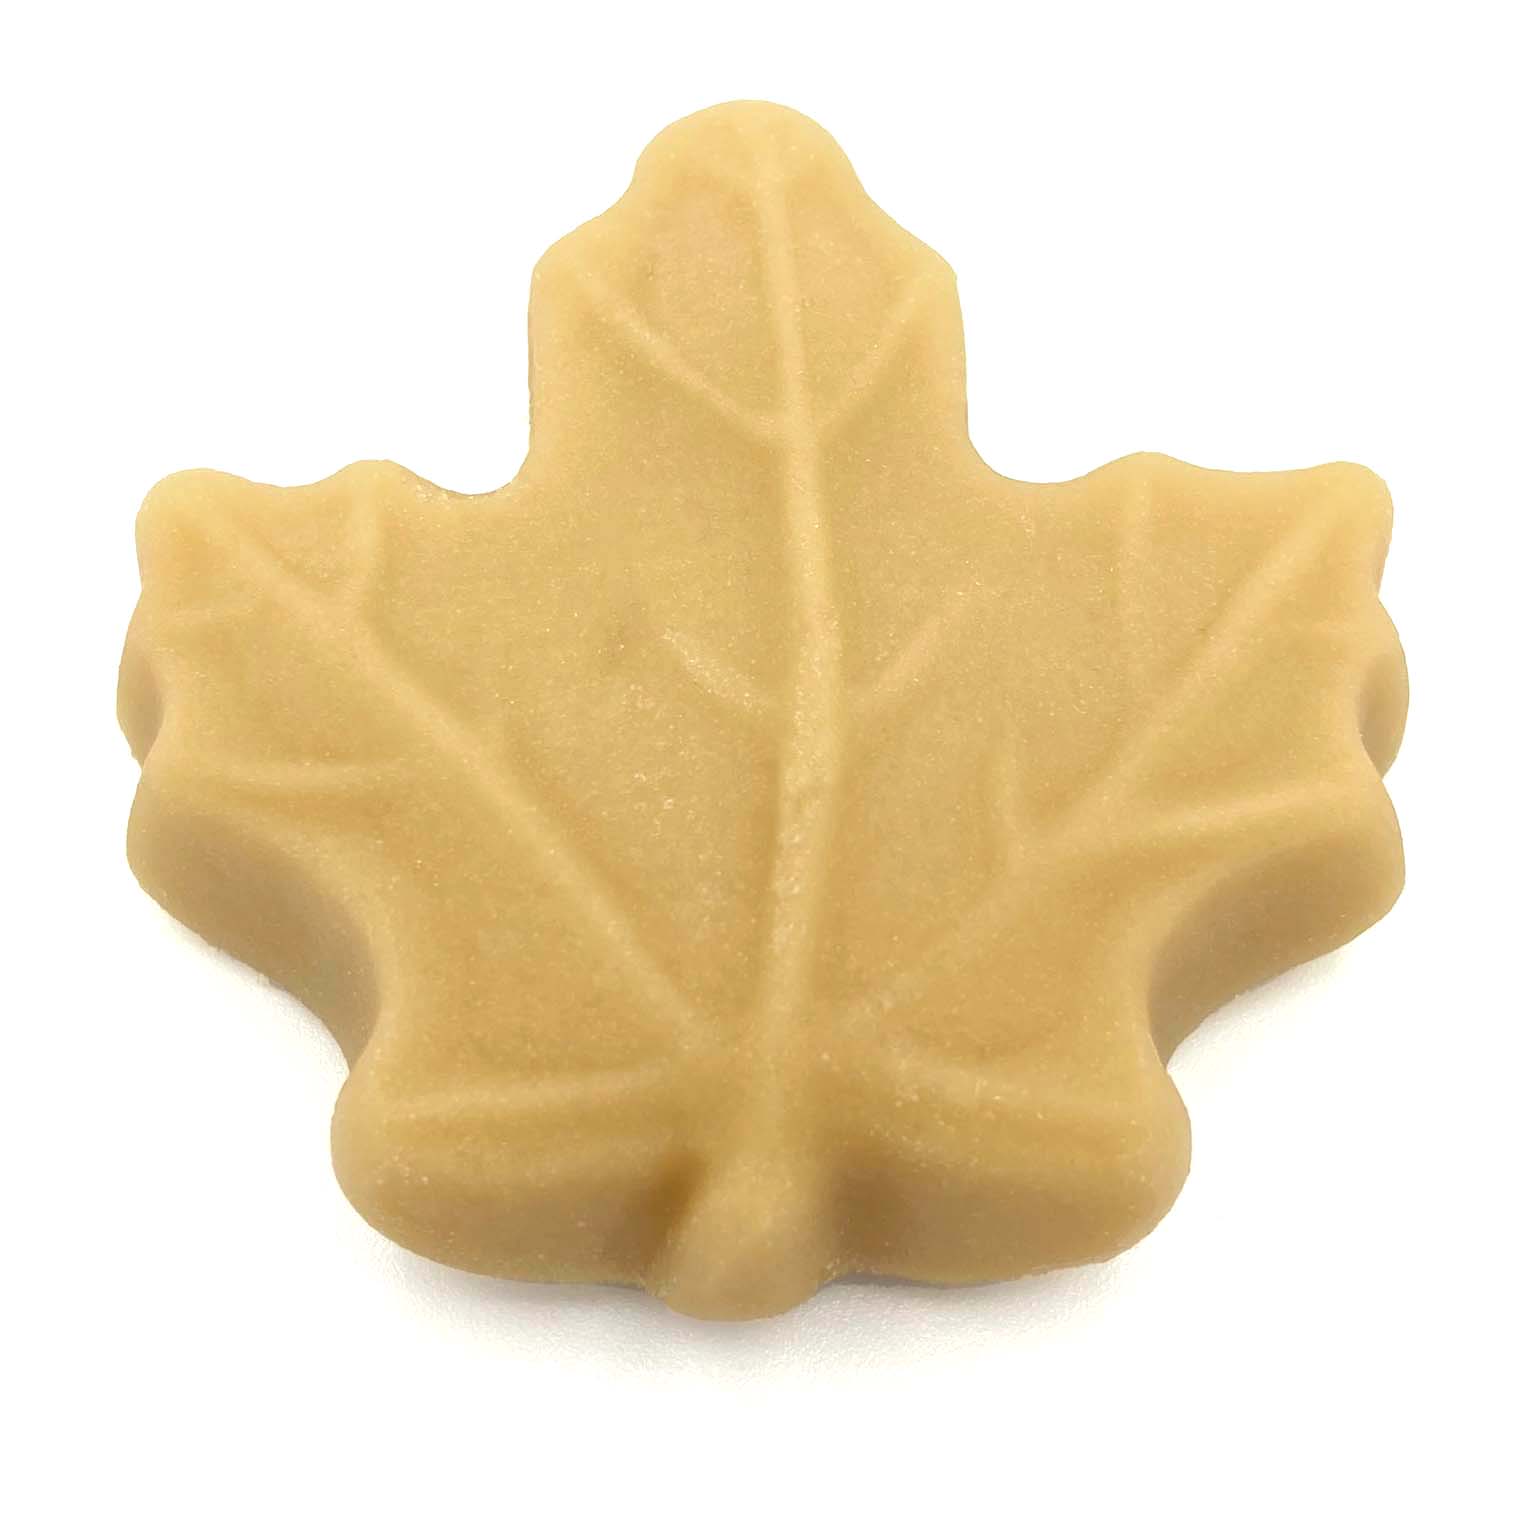 vermont maple candy